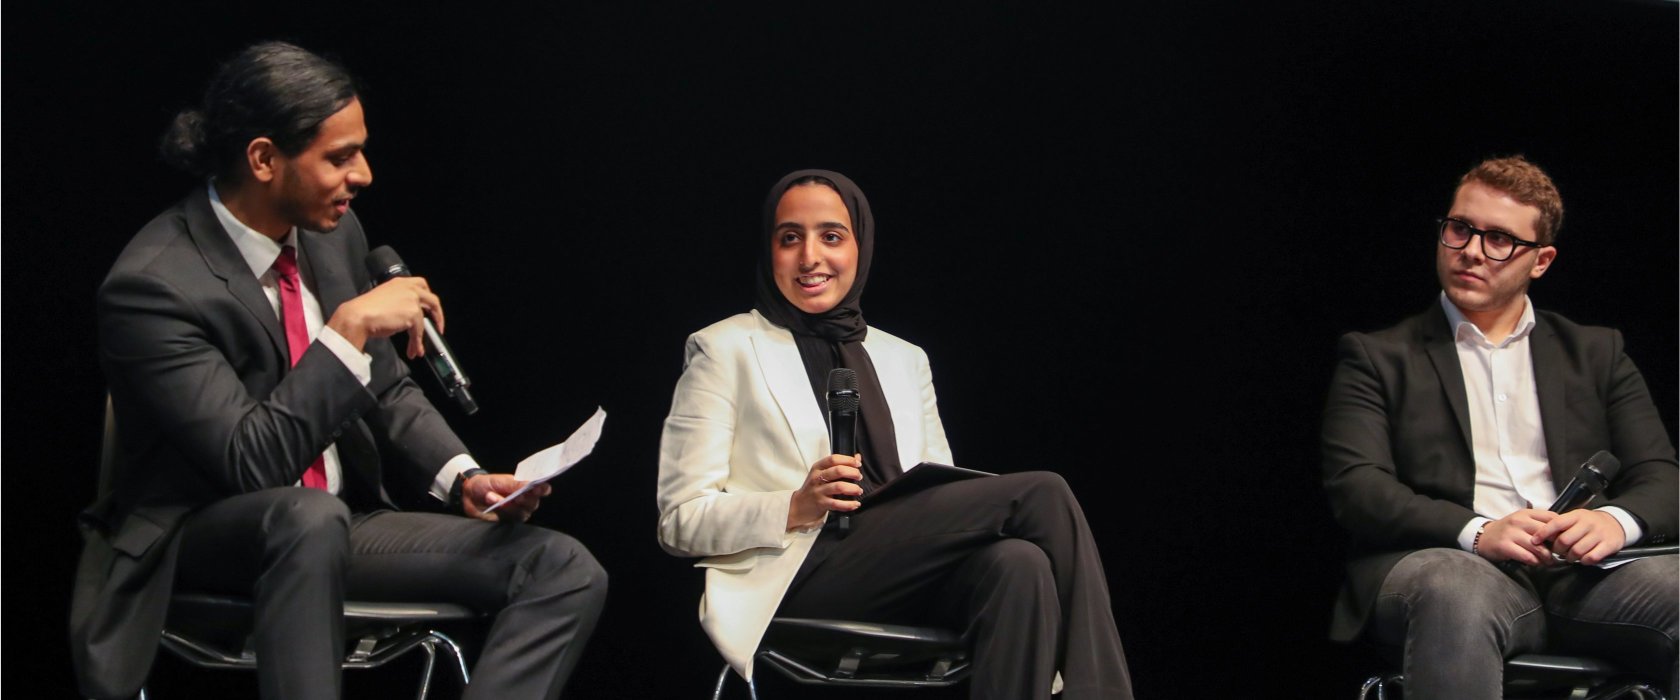 Personal choices are at the heart of climate change, QF debaters argue